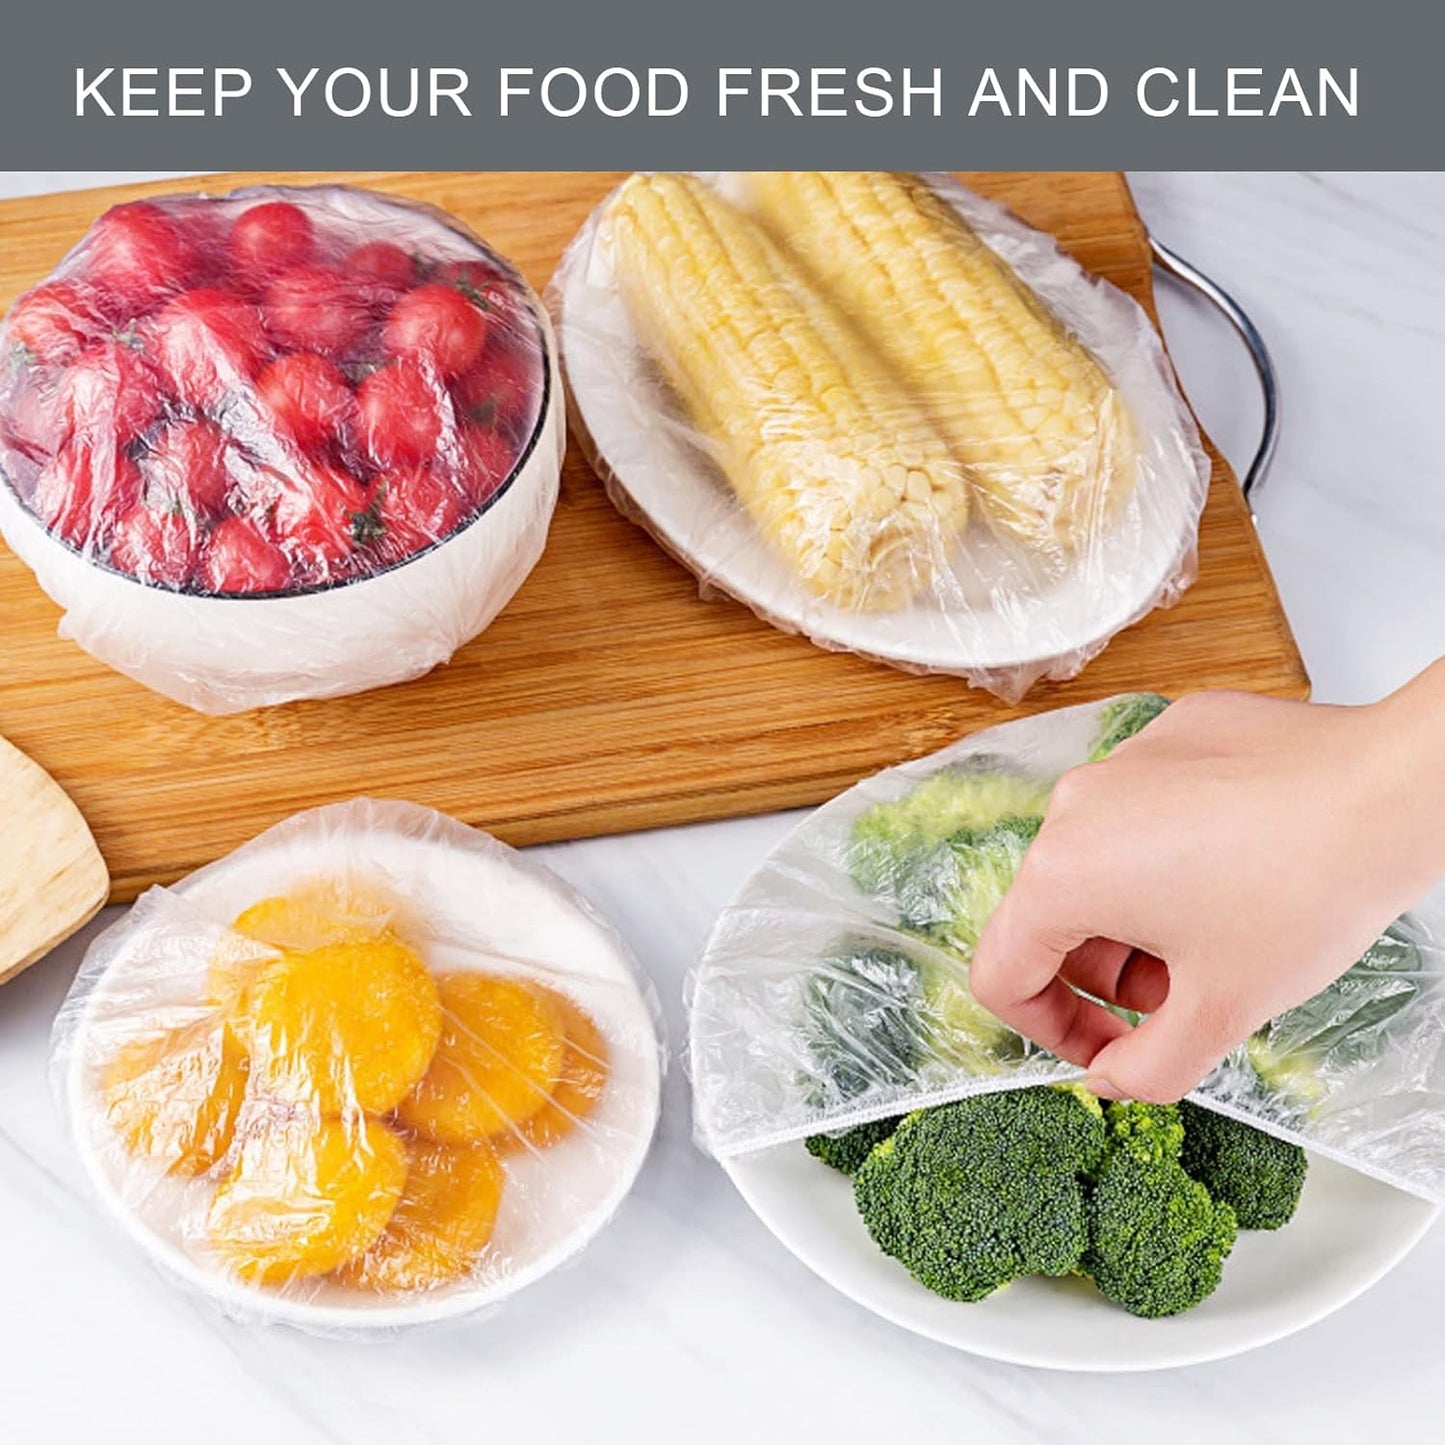 100pc Disposable Cling Film Cover Household Refrigerator Food Fruit Preservation Cover Dust-proof Plastic Fresh-keeping Cover